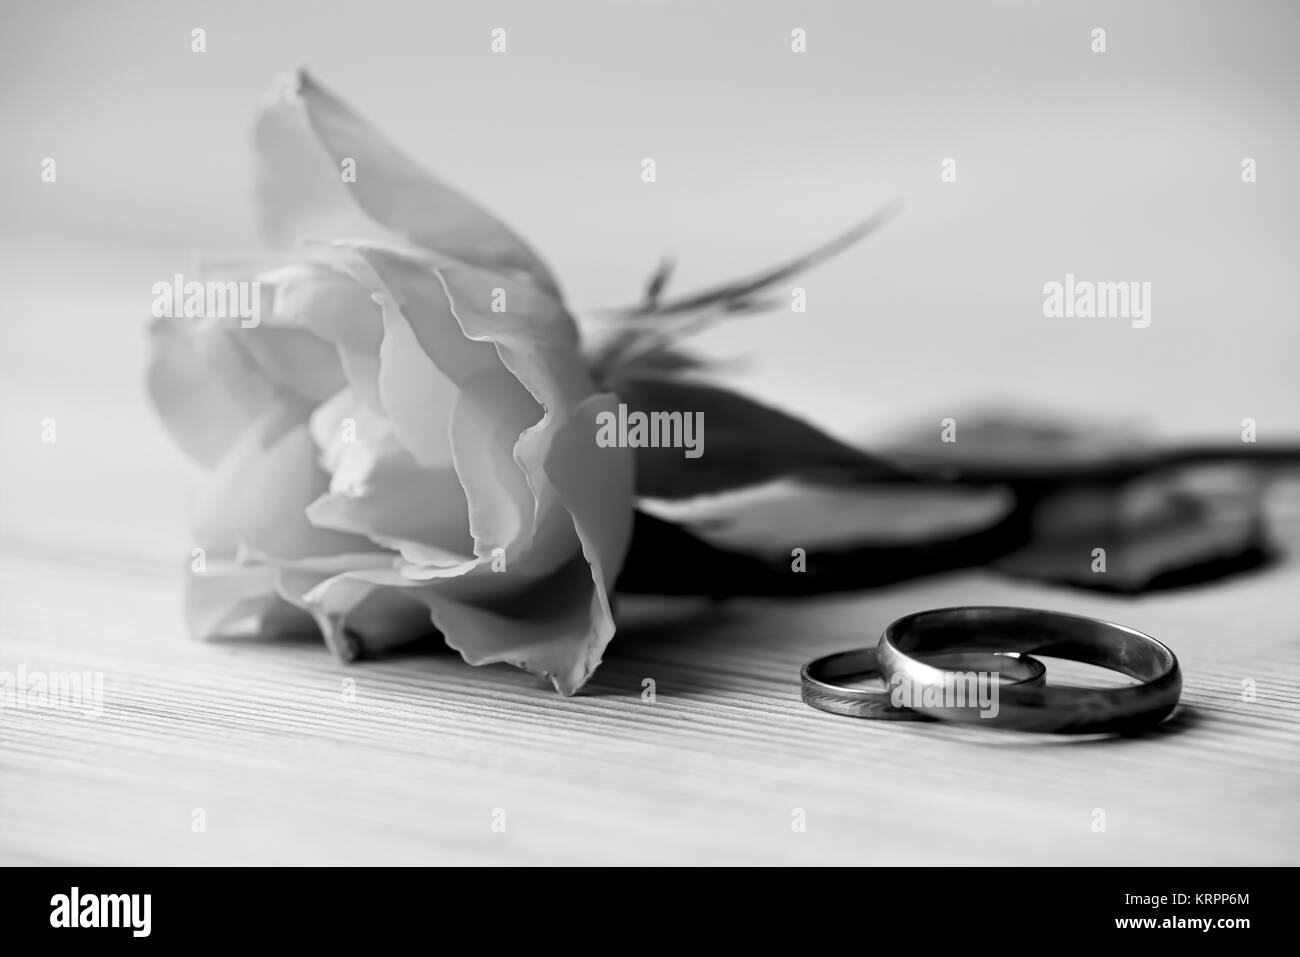 rose and wedding rings lie on a table Stock Photo